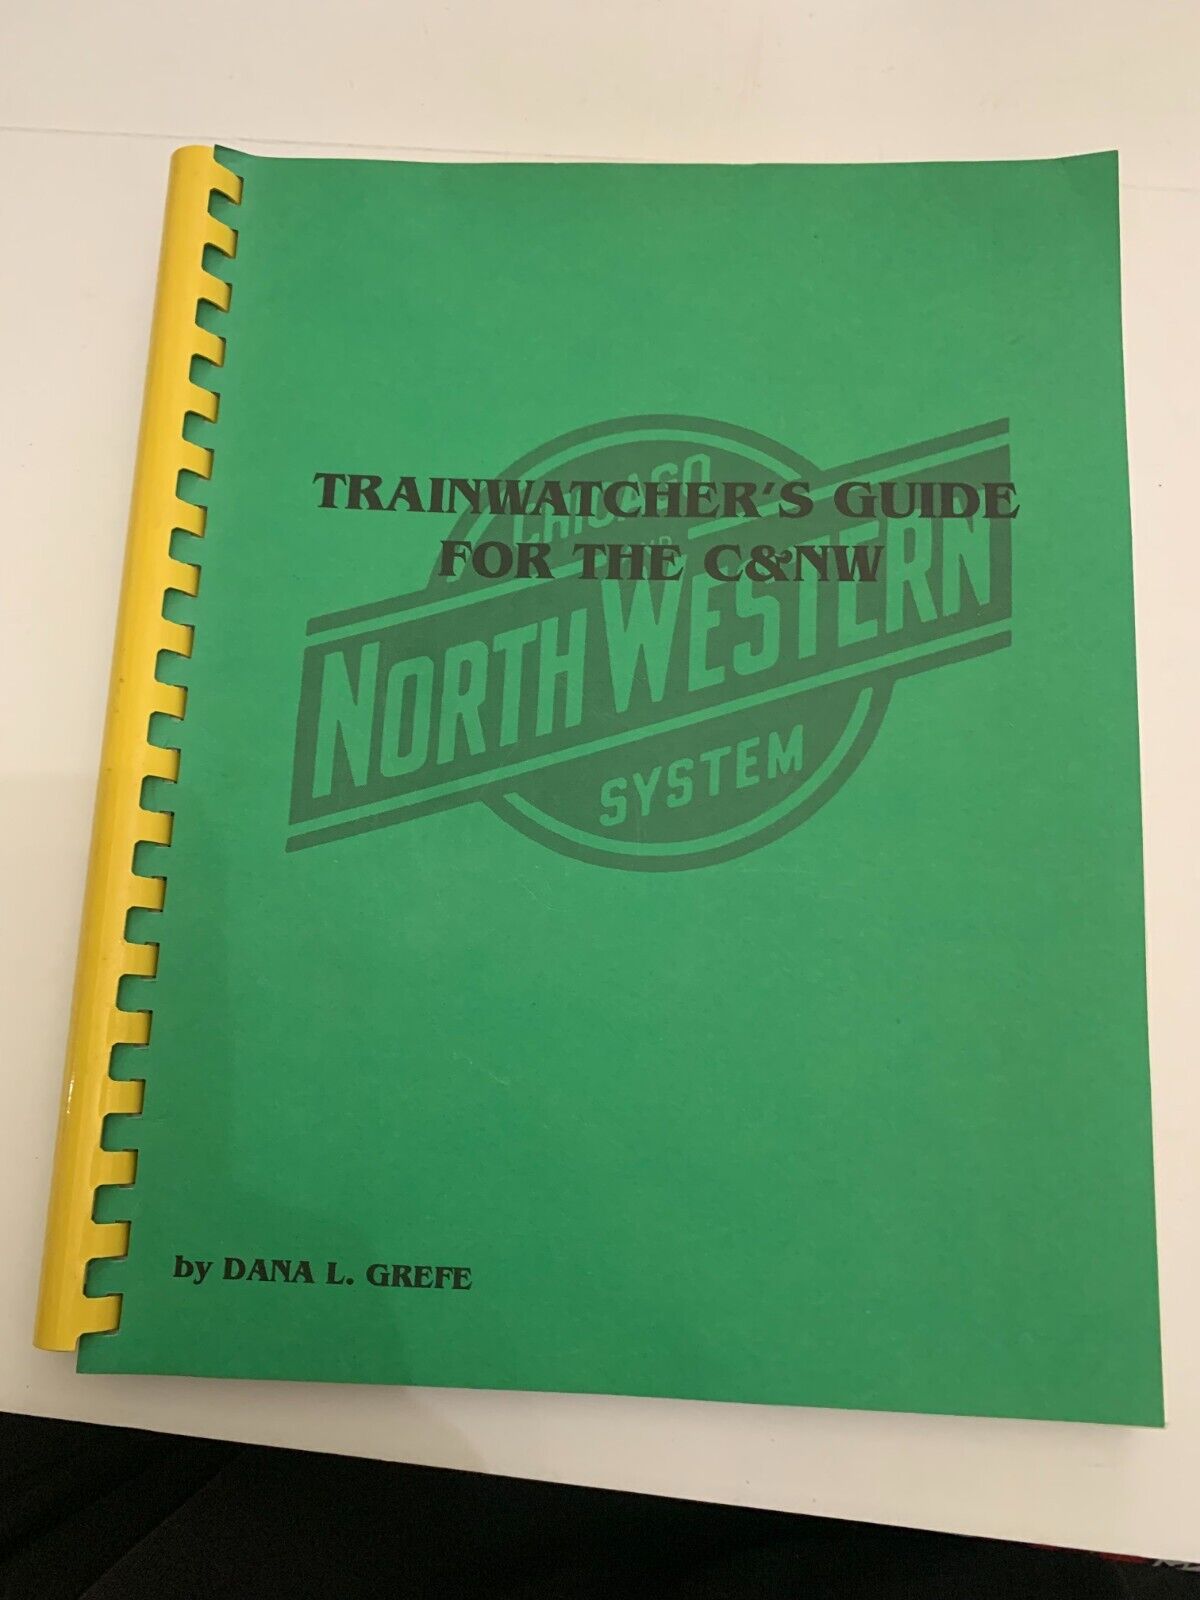 1994 Chicago North Western System Trainwatcher\'s Guide For C&NW by Dana L. Grefe